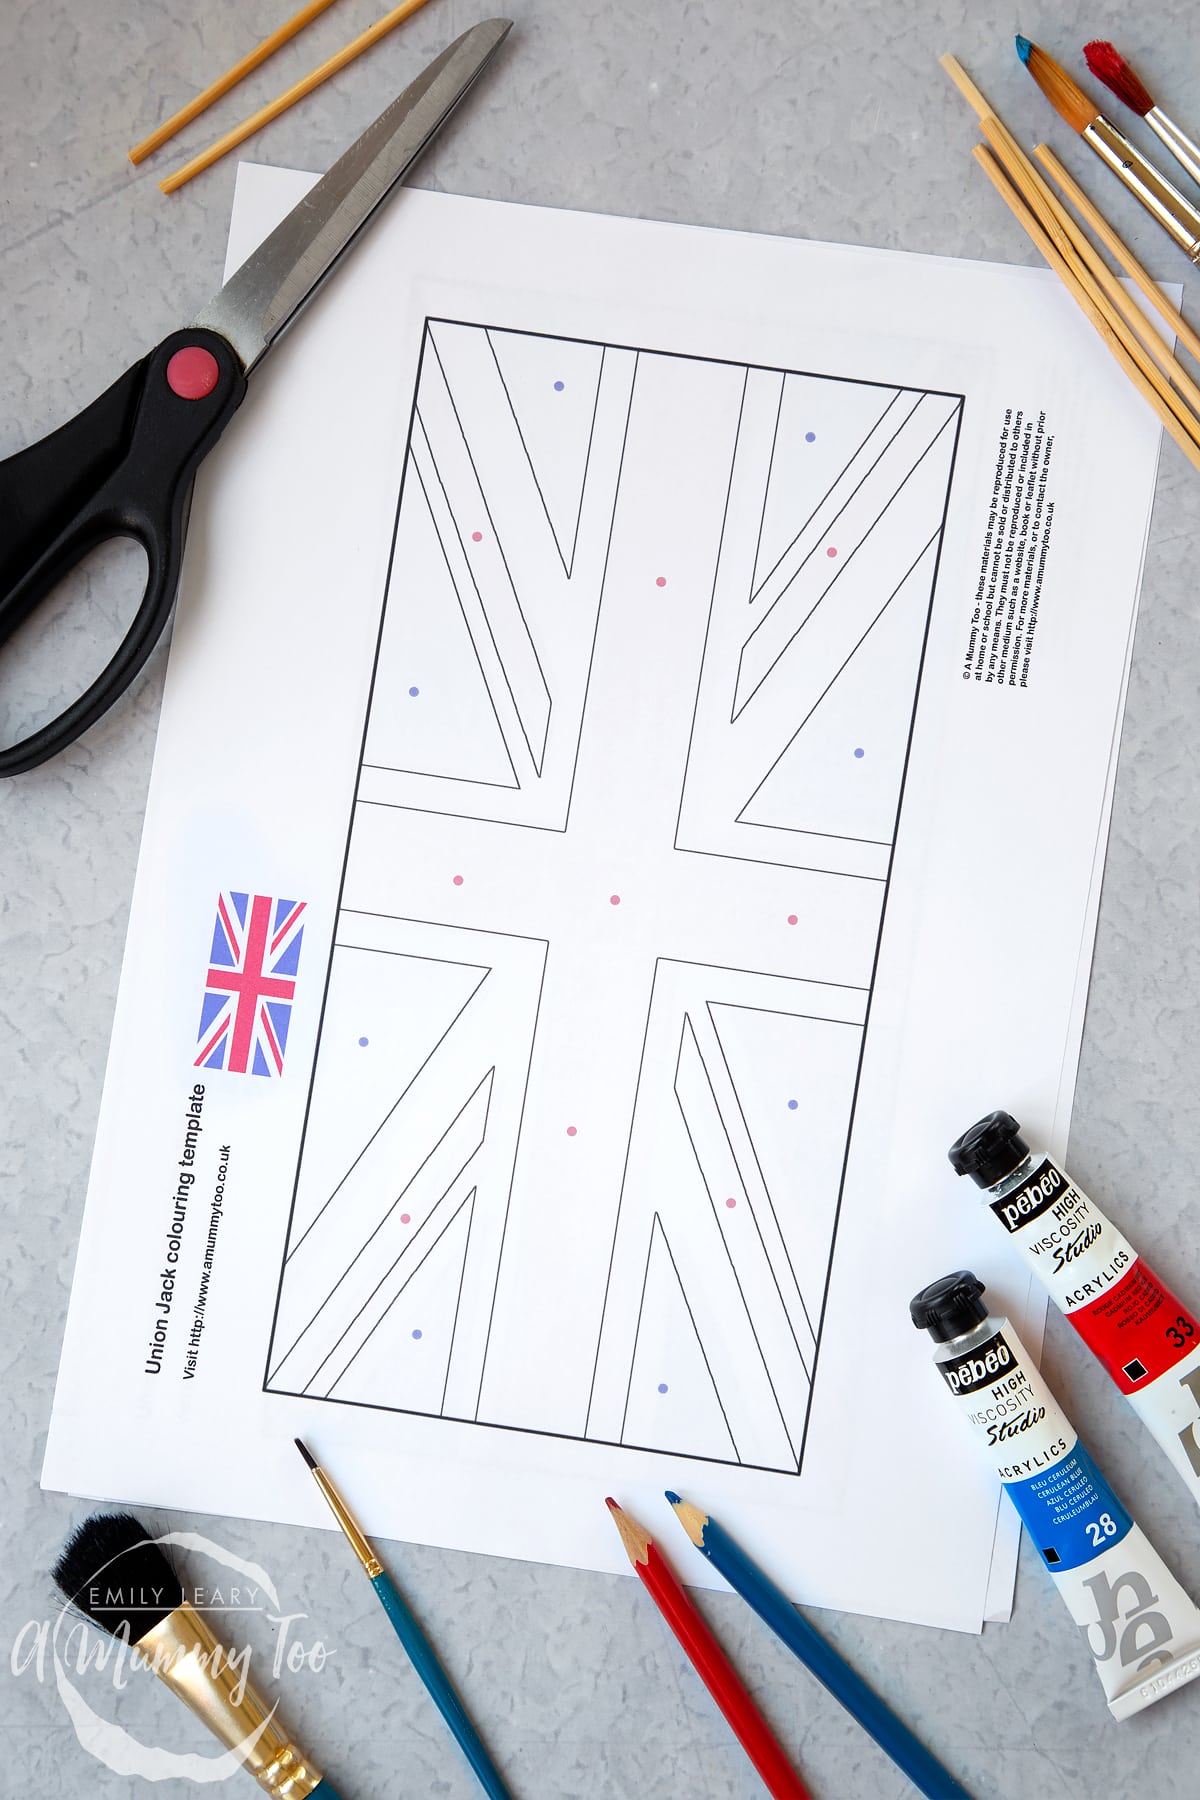 printed Union jack print out with dots to show where the colours are meant to go.